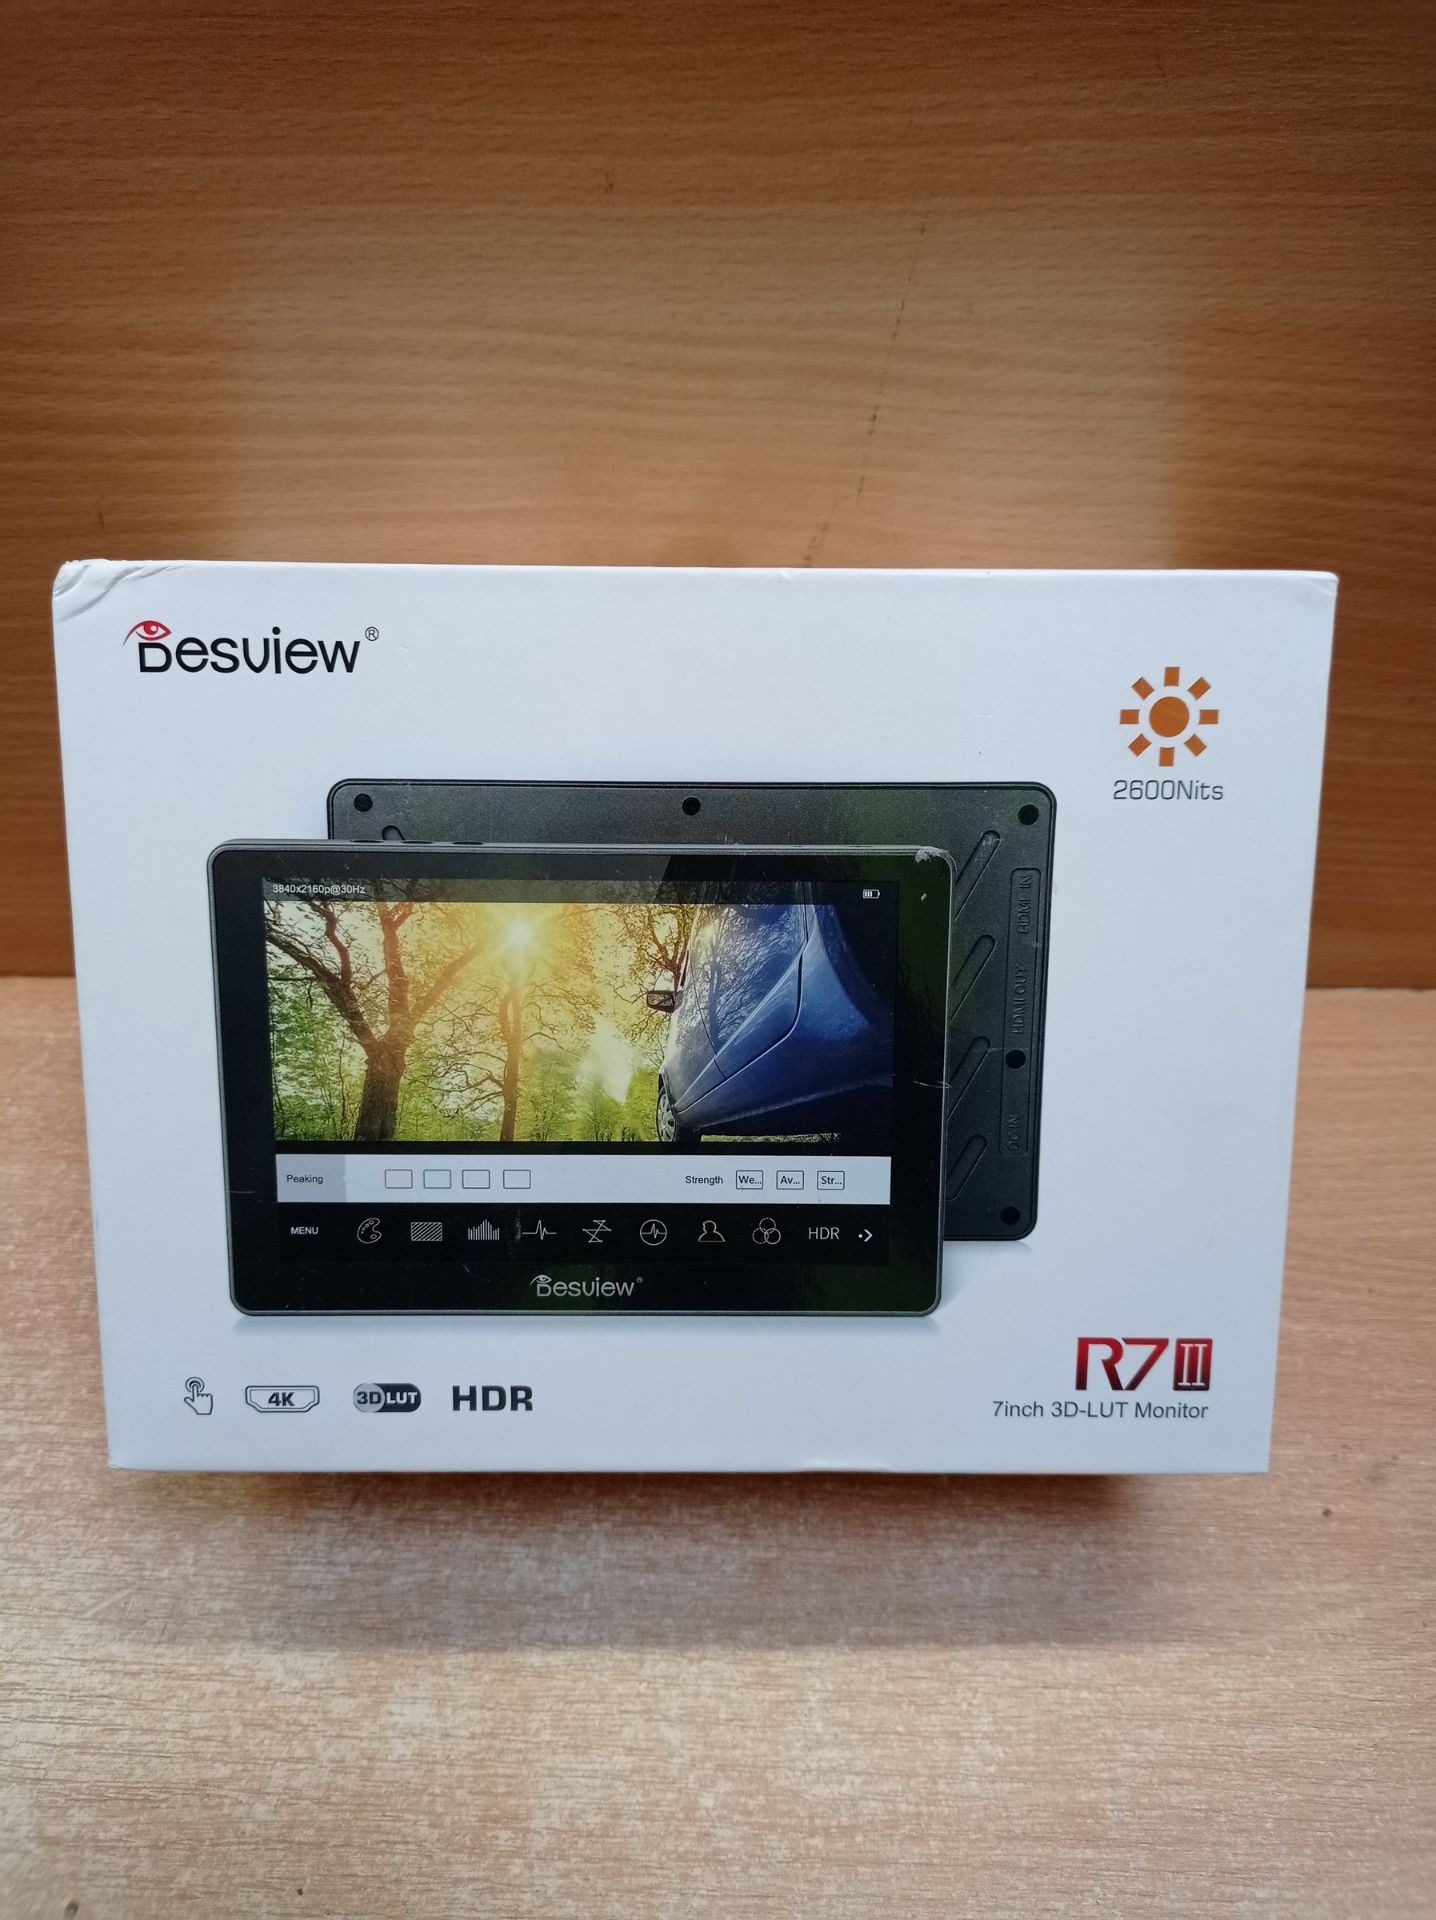 RRP £351.95 Desview R7II 2600Nits Camera Field Monitor - Image 2 of 2